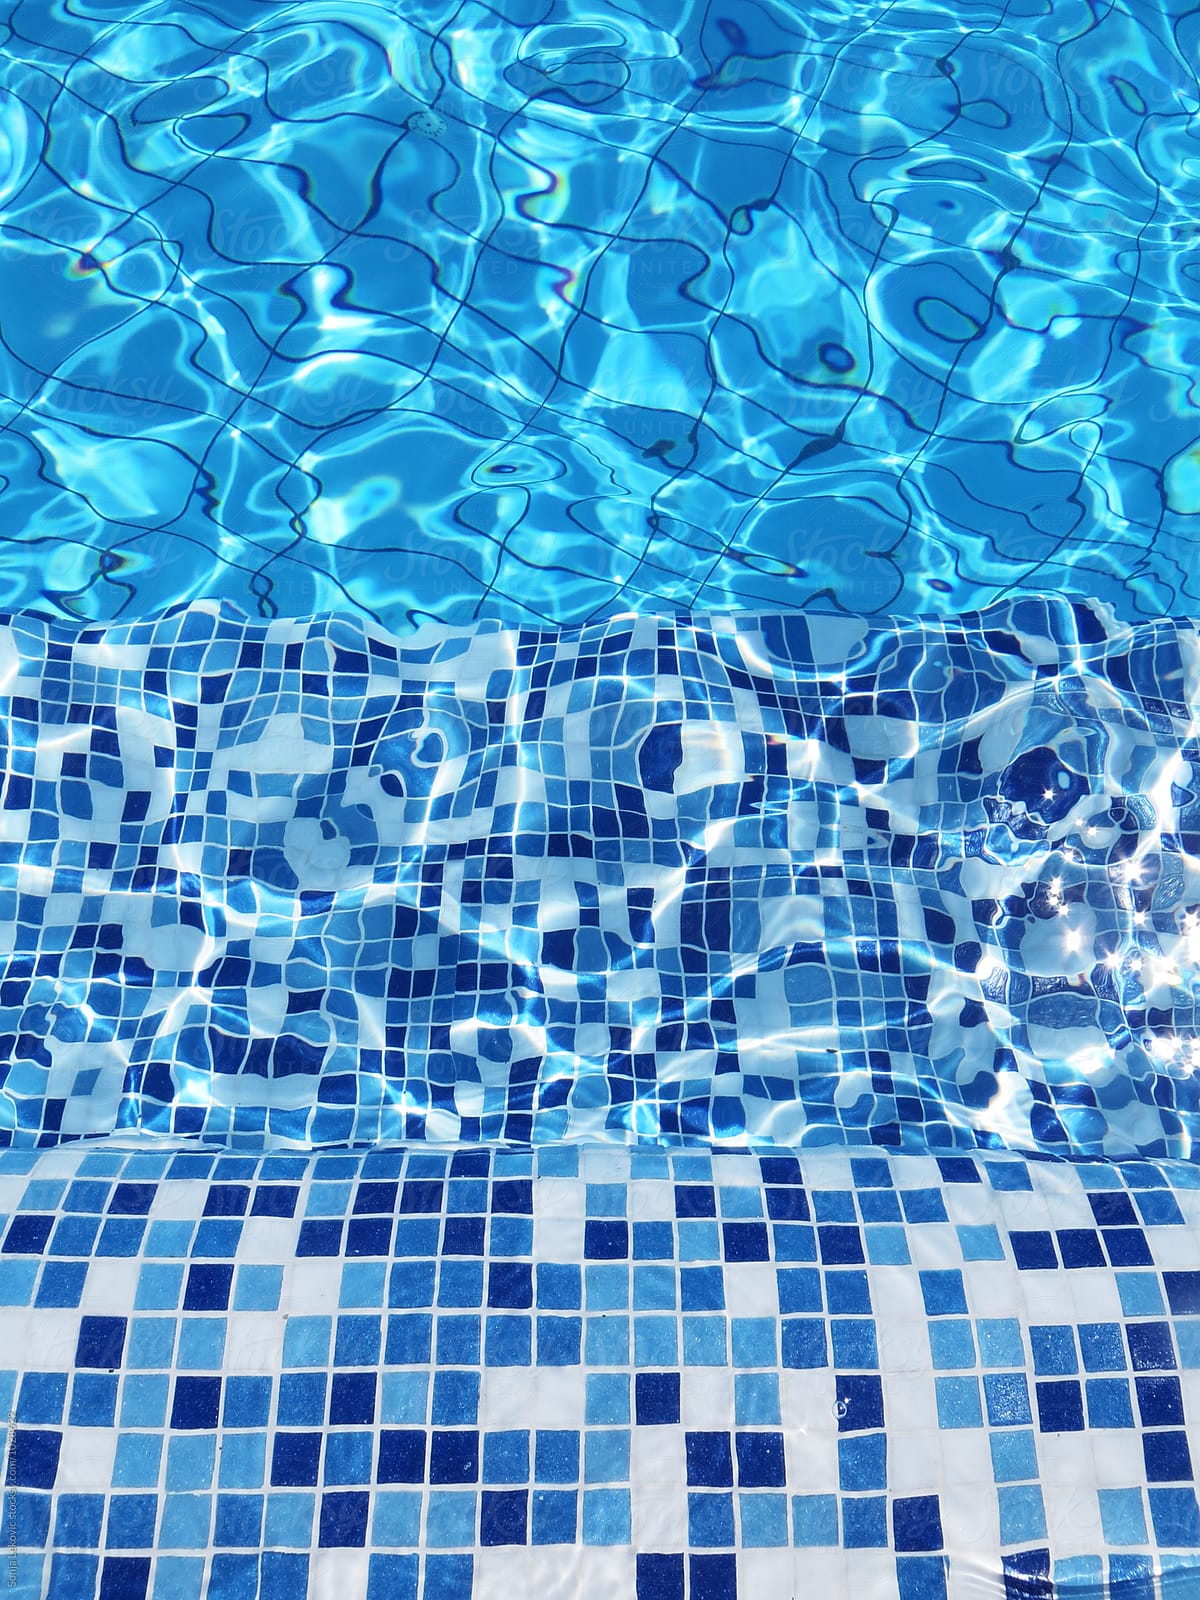 blue swimming pool tile background